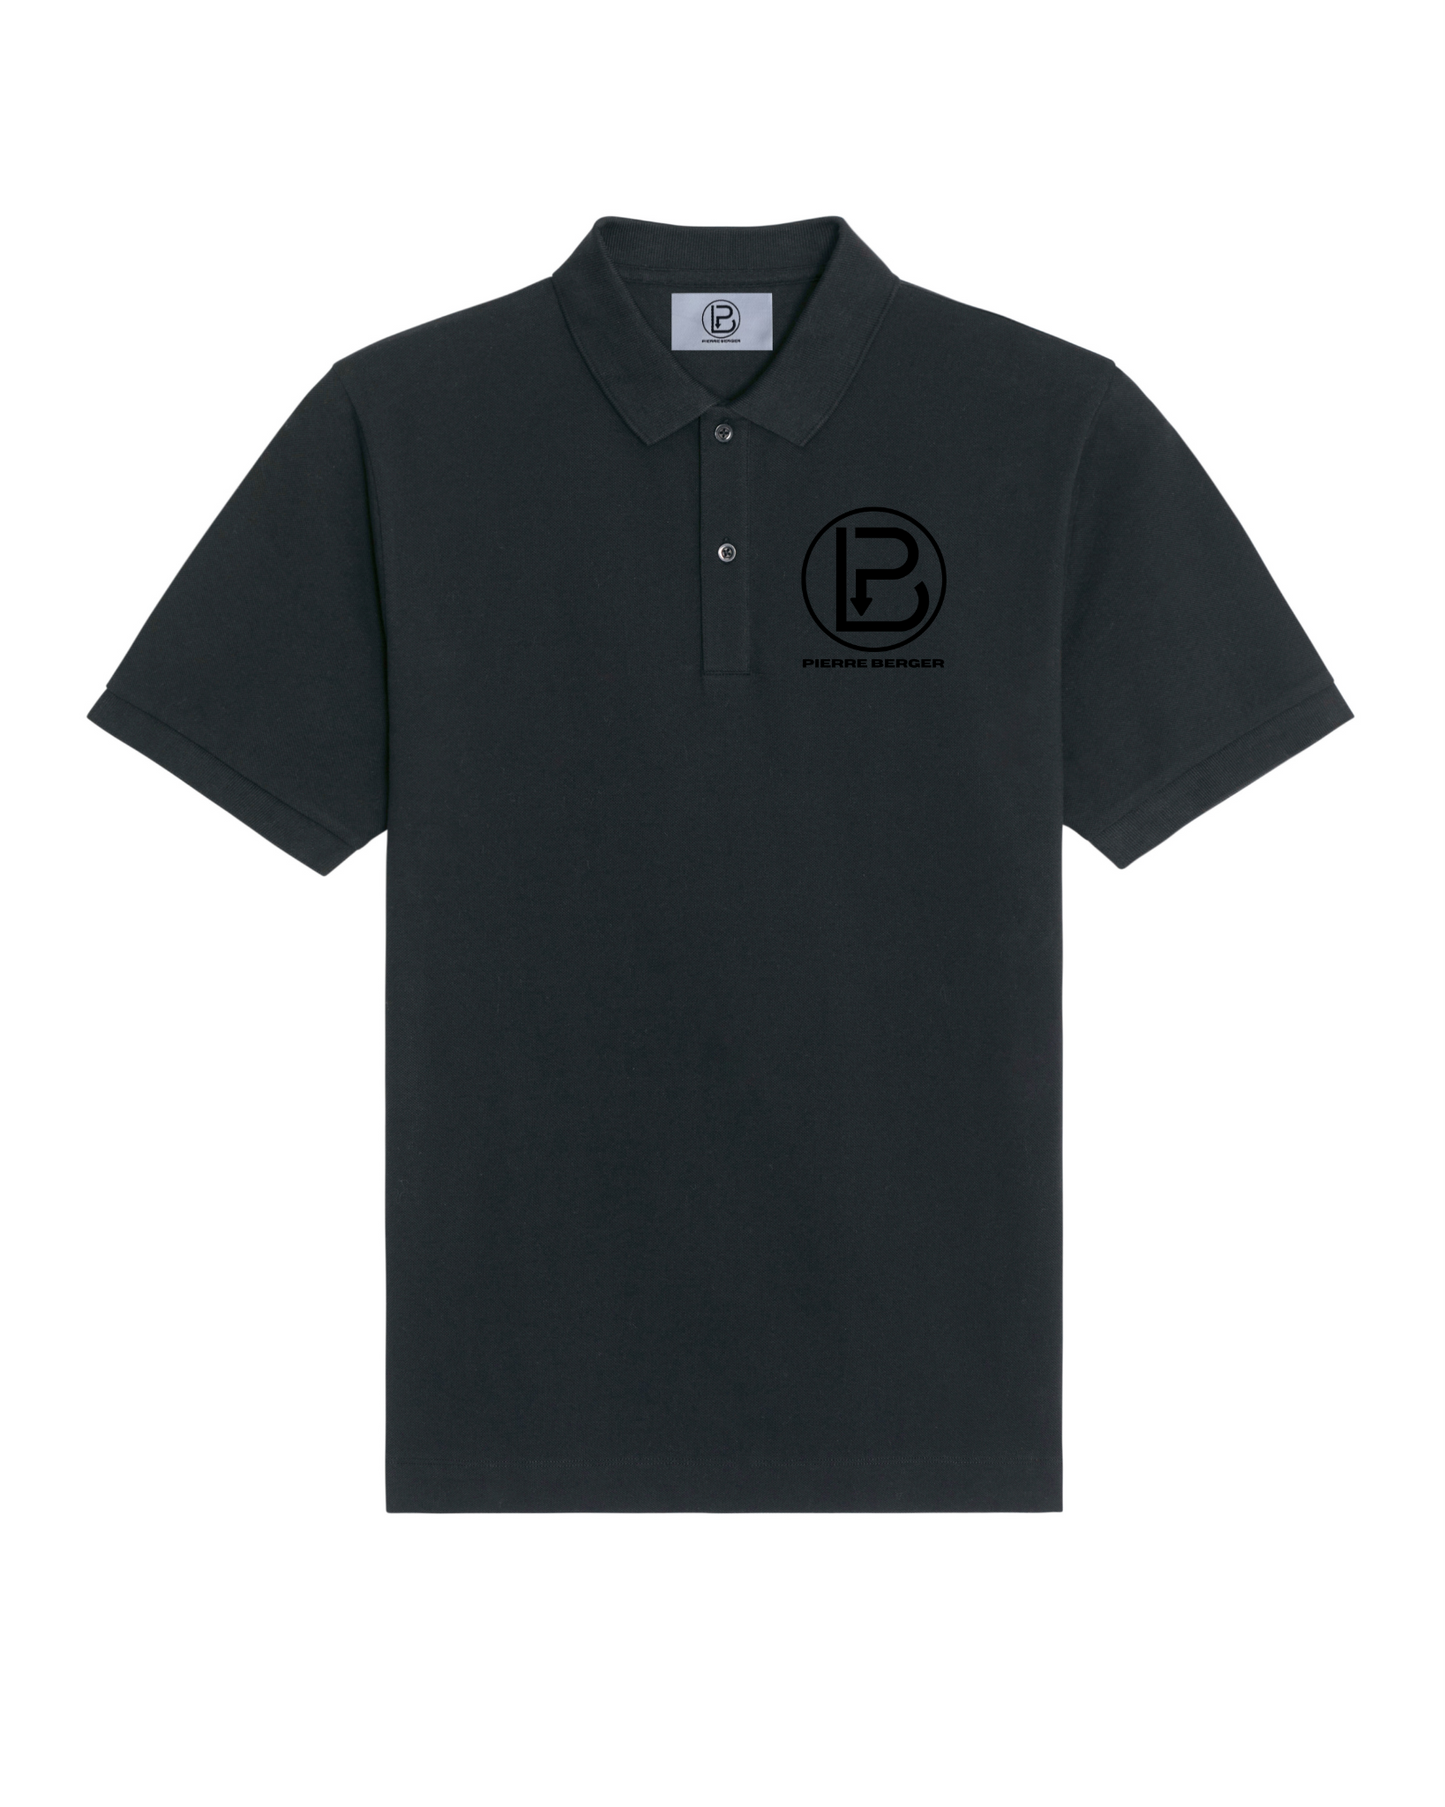 PIERRE BERGER - 100% organic cotton unisex polo shirt embroidery